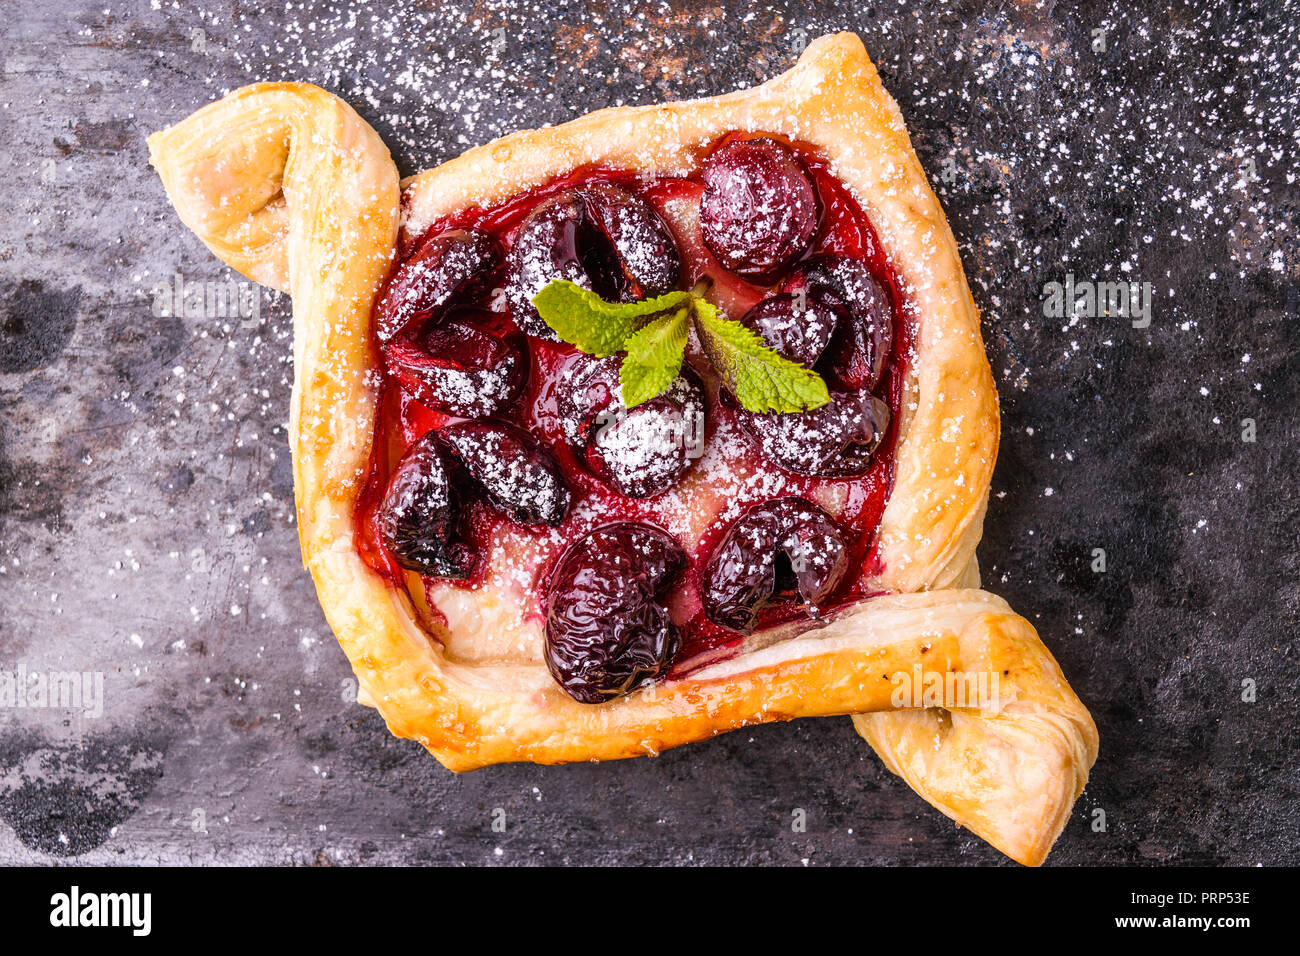 Homemade puff pastry with cherry. Sweet tasty dessert. Decorated with mint leaves. On old black cooking sheet. Stock Photo